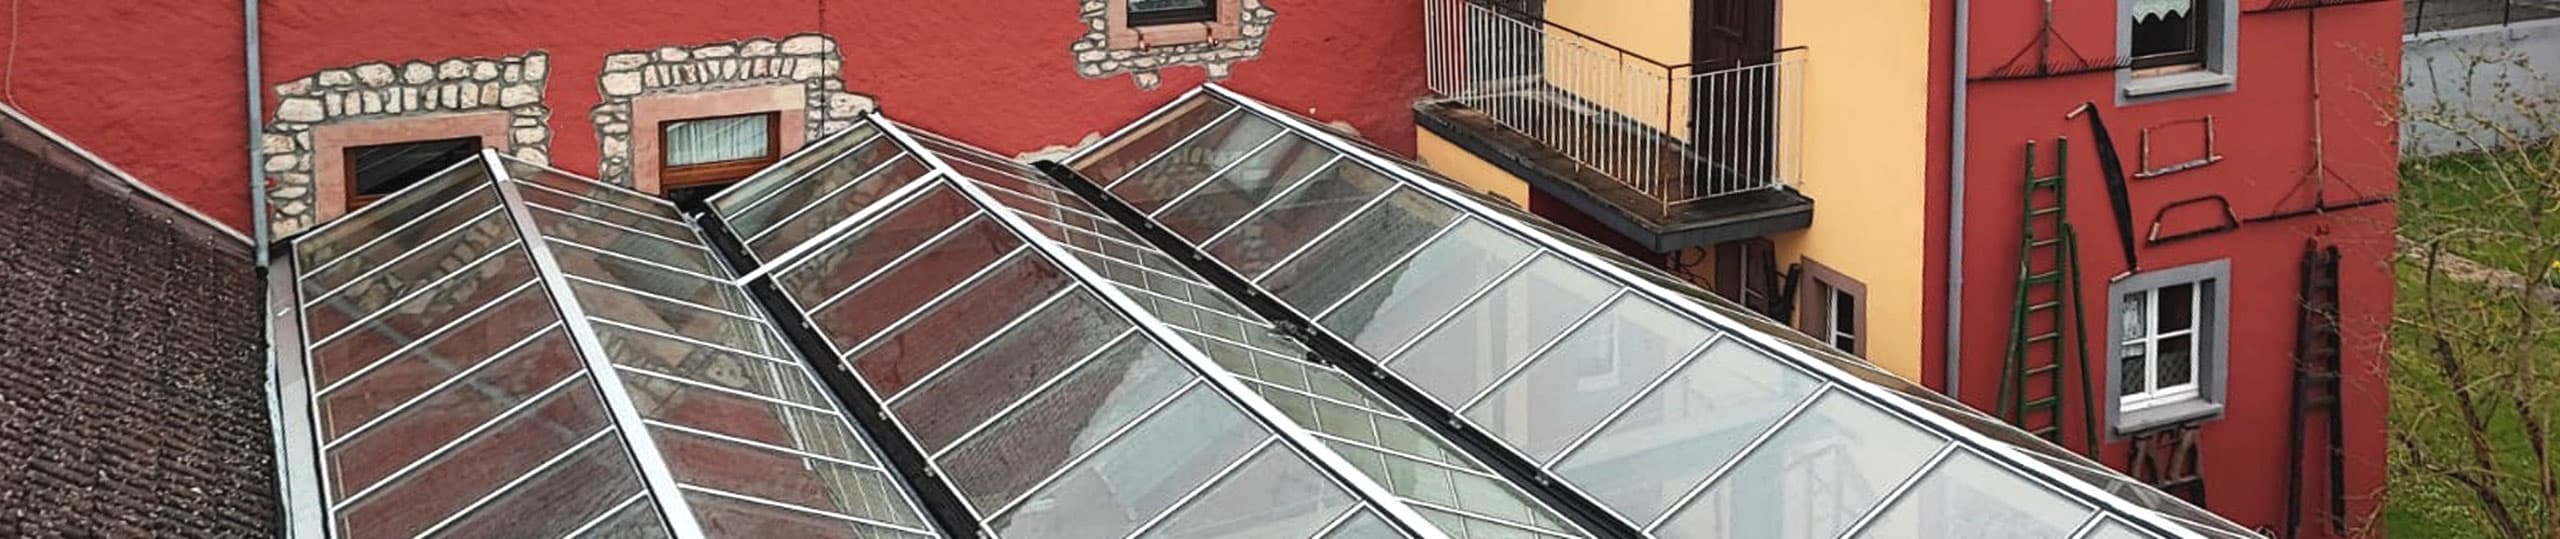 Atrium glazing - continuous rooflights or saddle rooflights combined to form a large glass roof